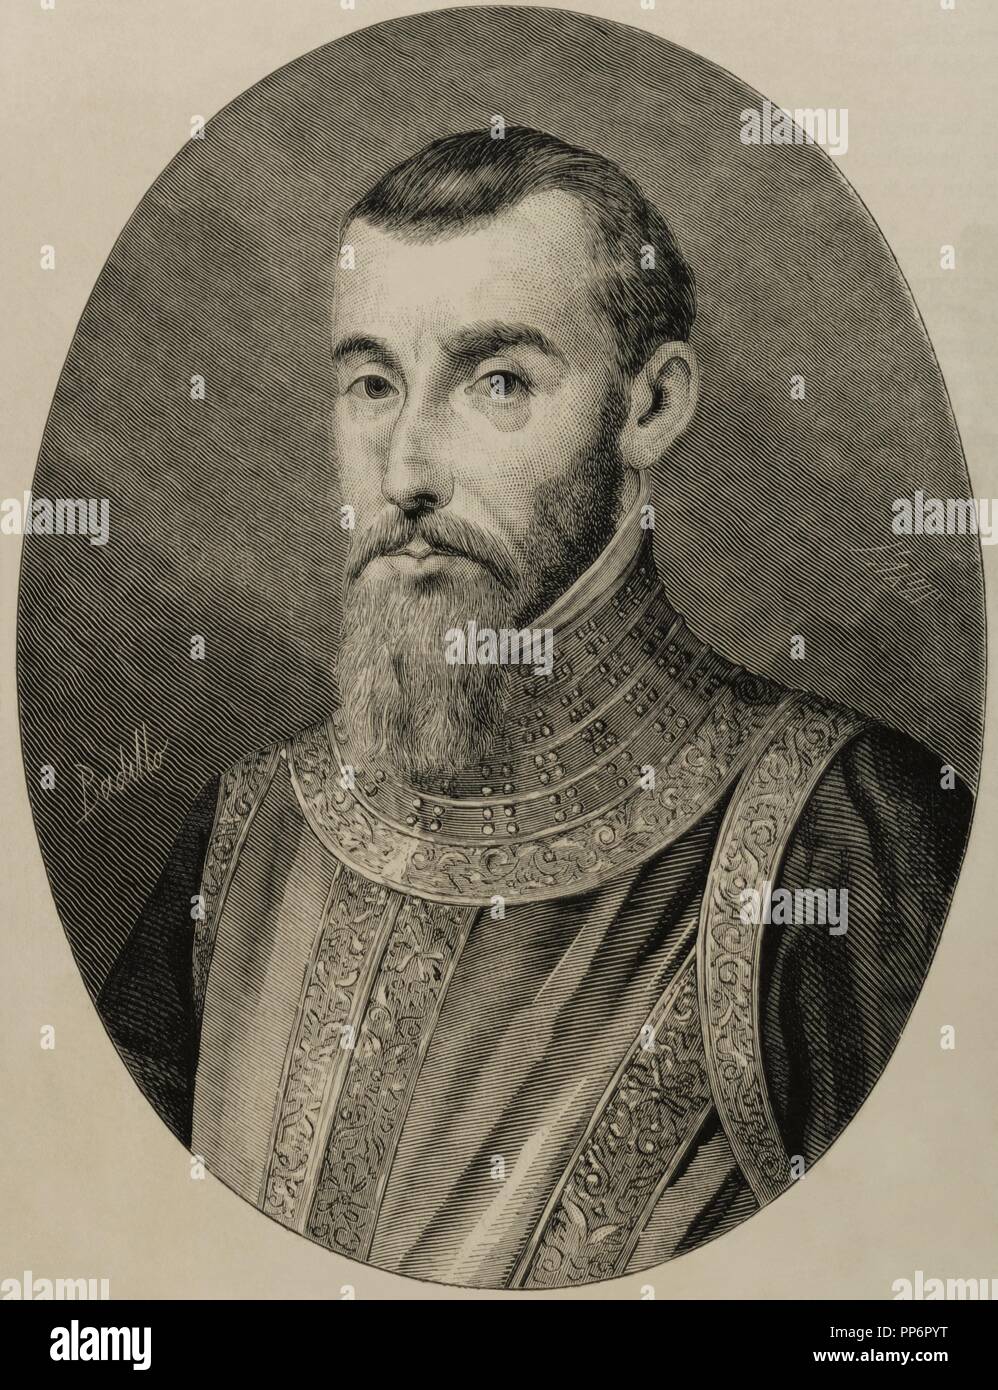 Pedro de La Gasca, The Peacemaker (1493-1567). Spanish priest, politician and military. Knight of the Order of Santiago. Engraving by Paris. The Spanish and American Illustration, 1876. Stock Photo